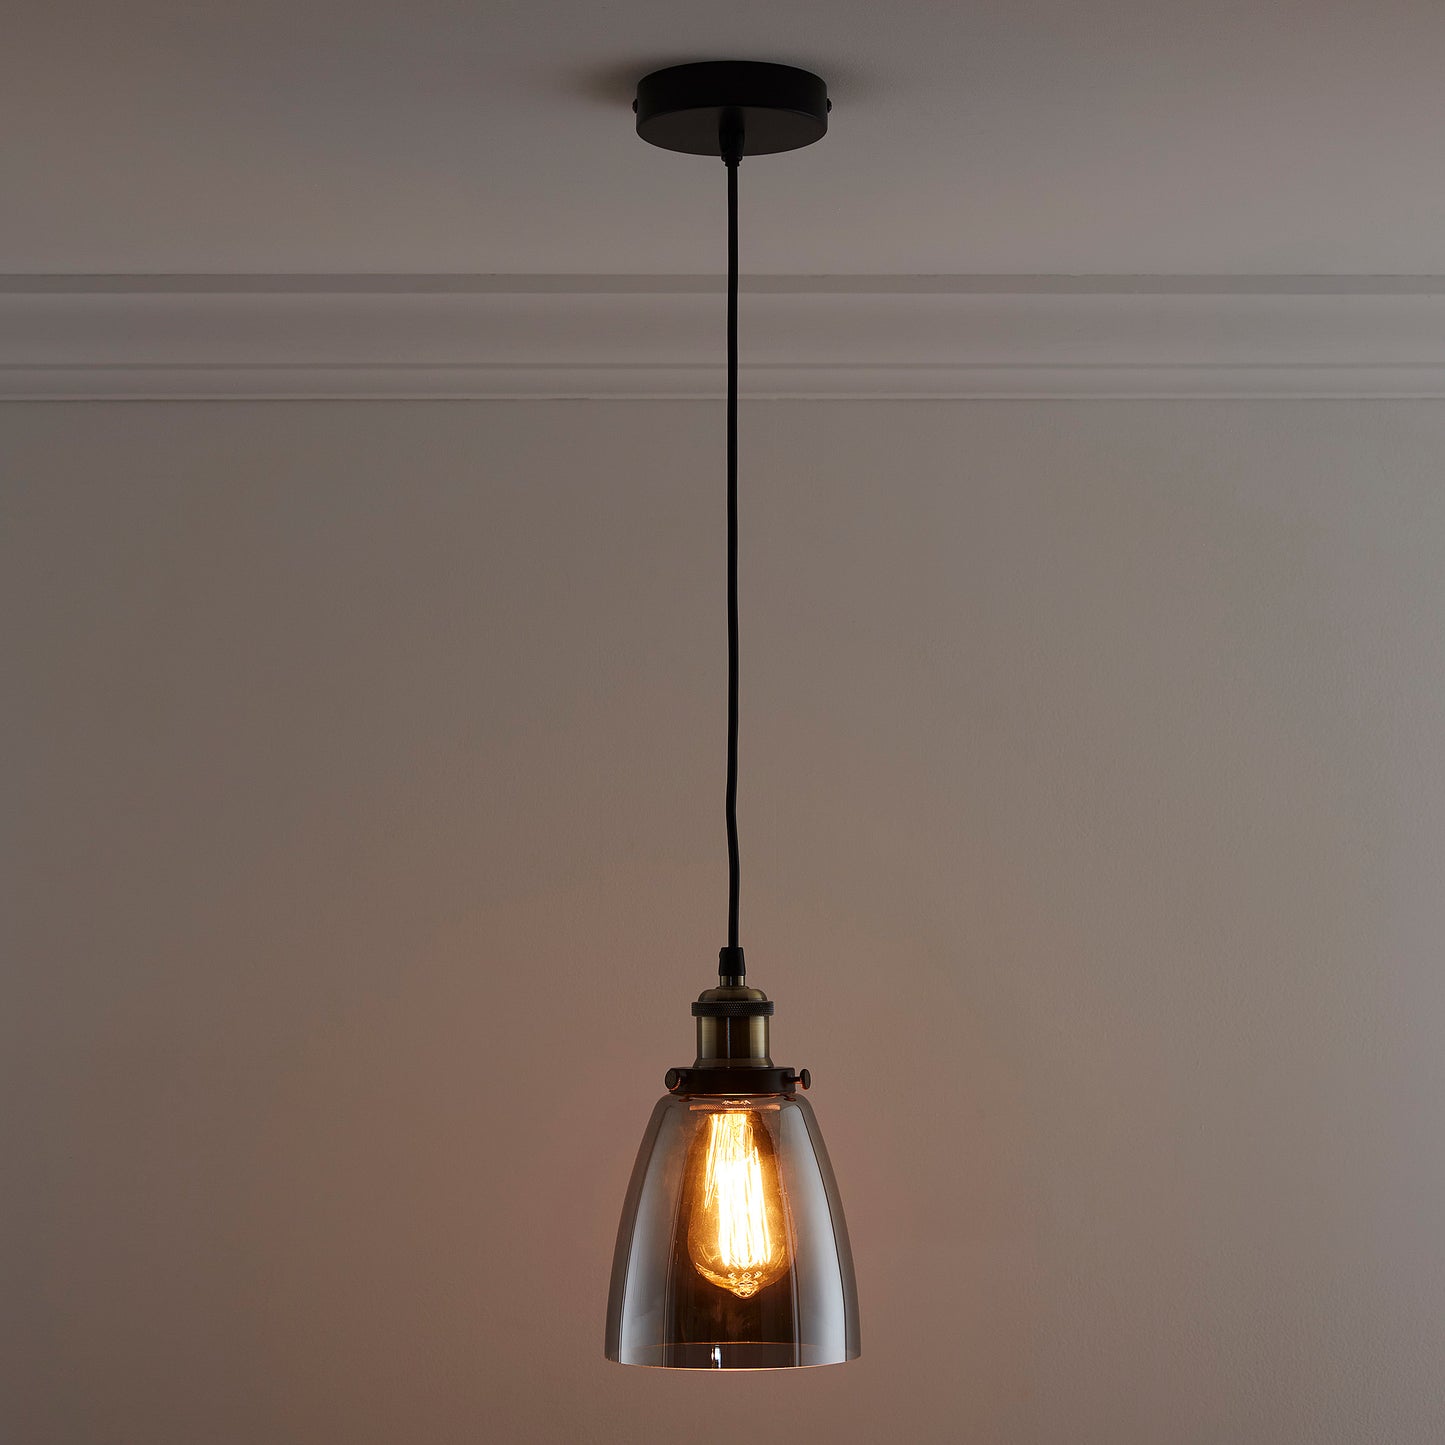 Glass Ceiling Pendant 1 Light in Amber or Smokey finishes, Including Filament Bulb